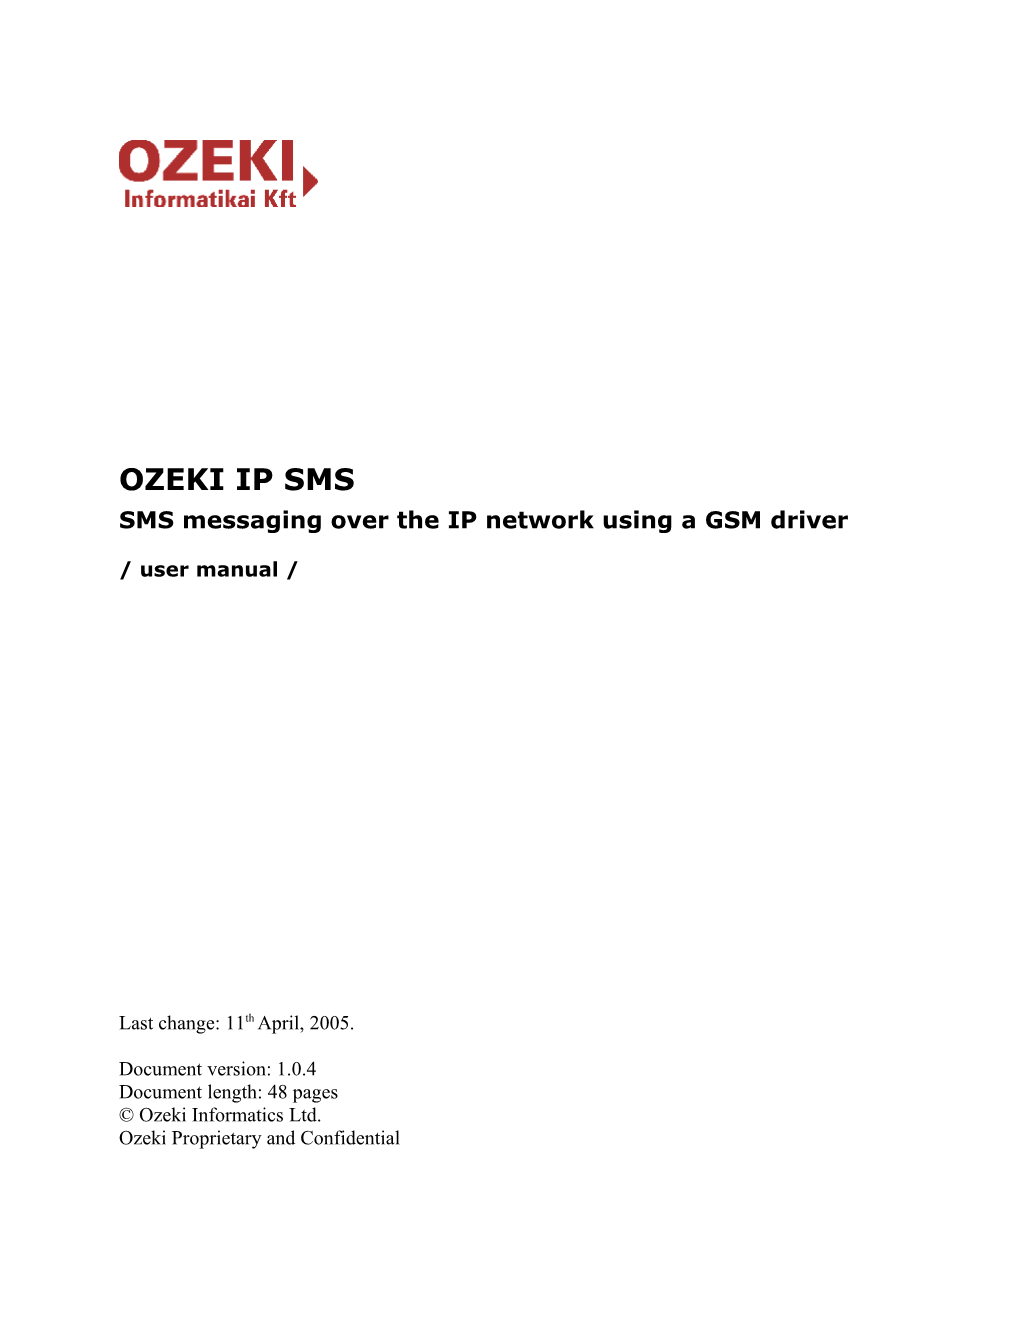 SMS Messaging Over the IP Network Using a GSM Driver